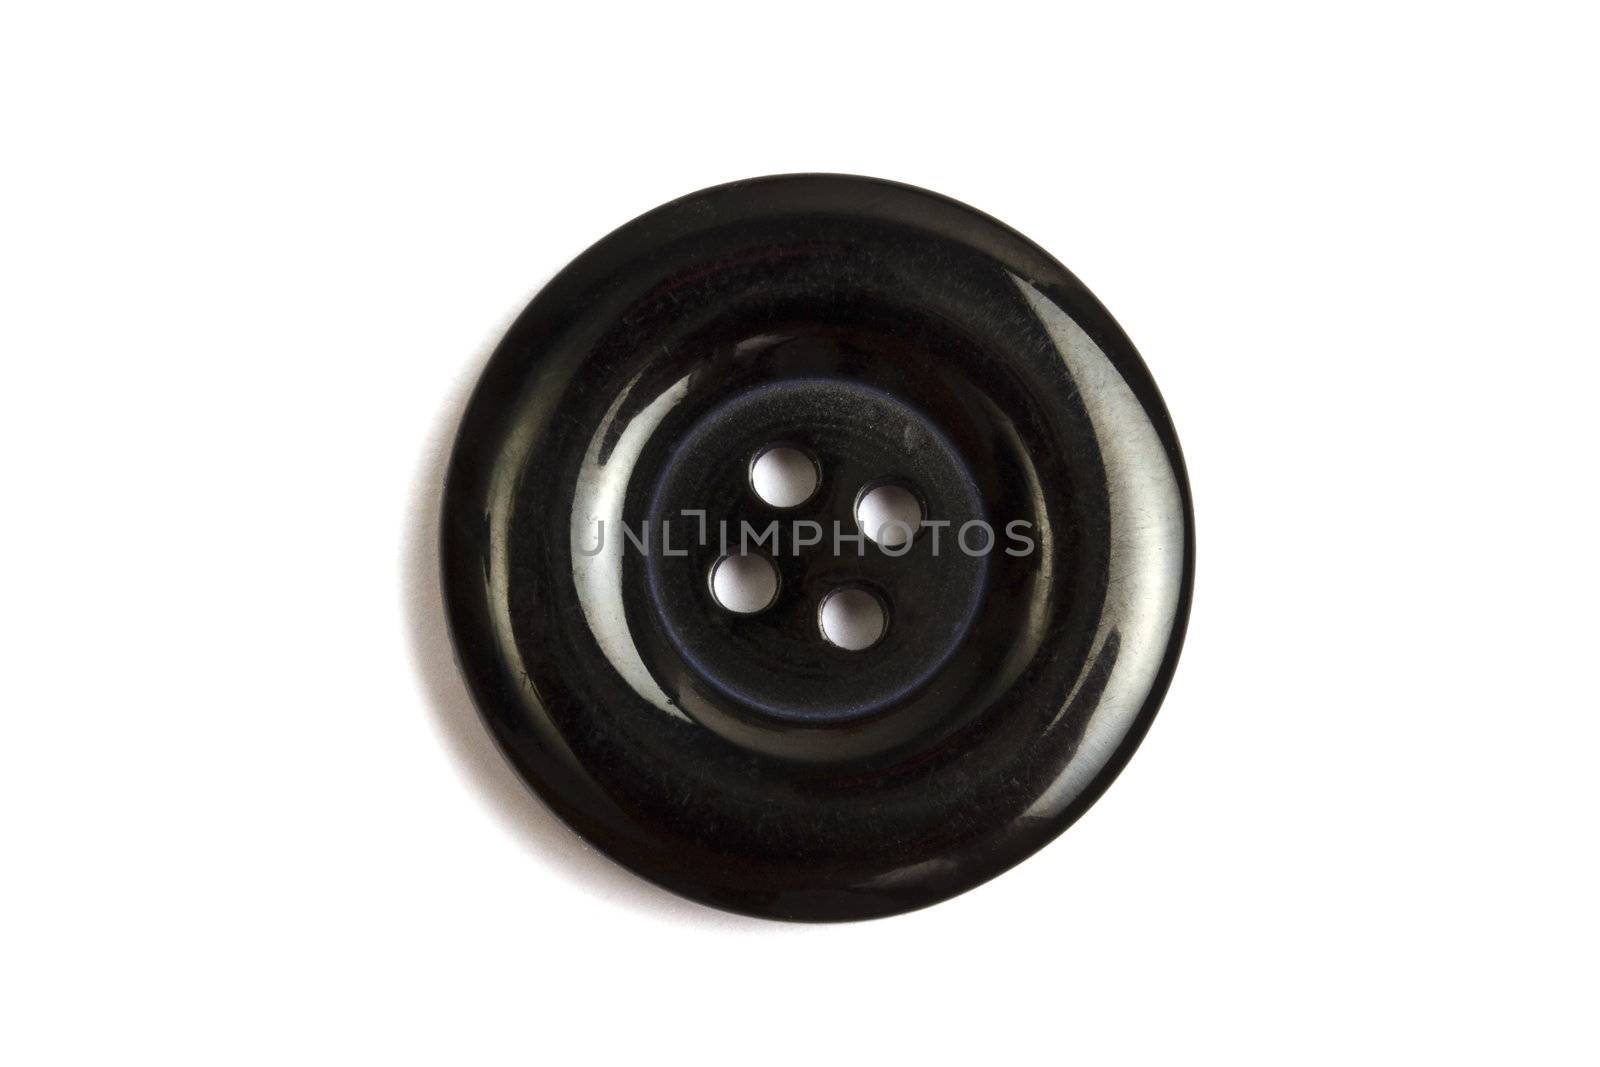  Black clothing button isolated on white background 